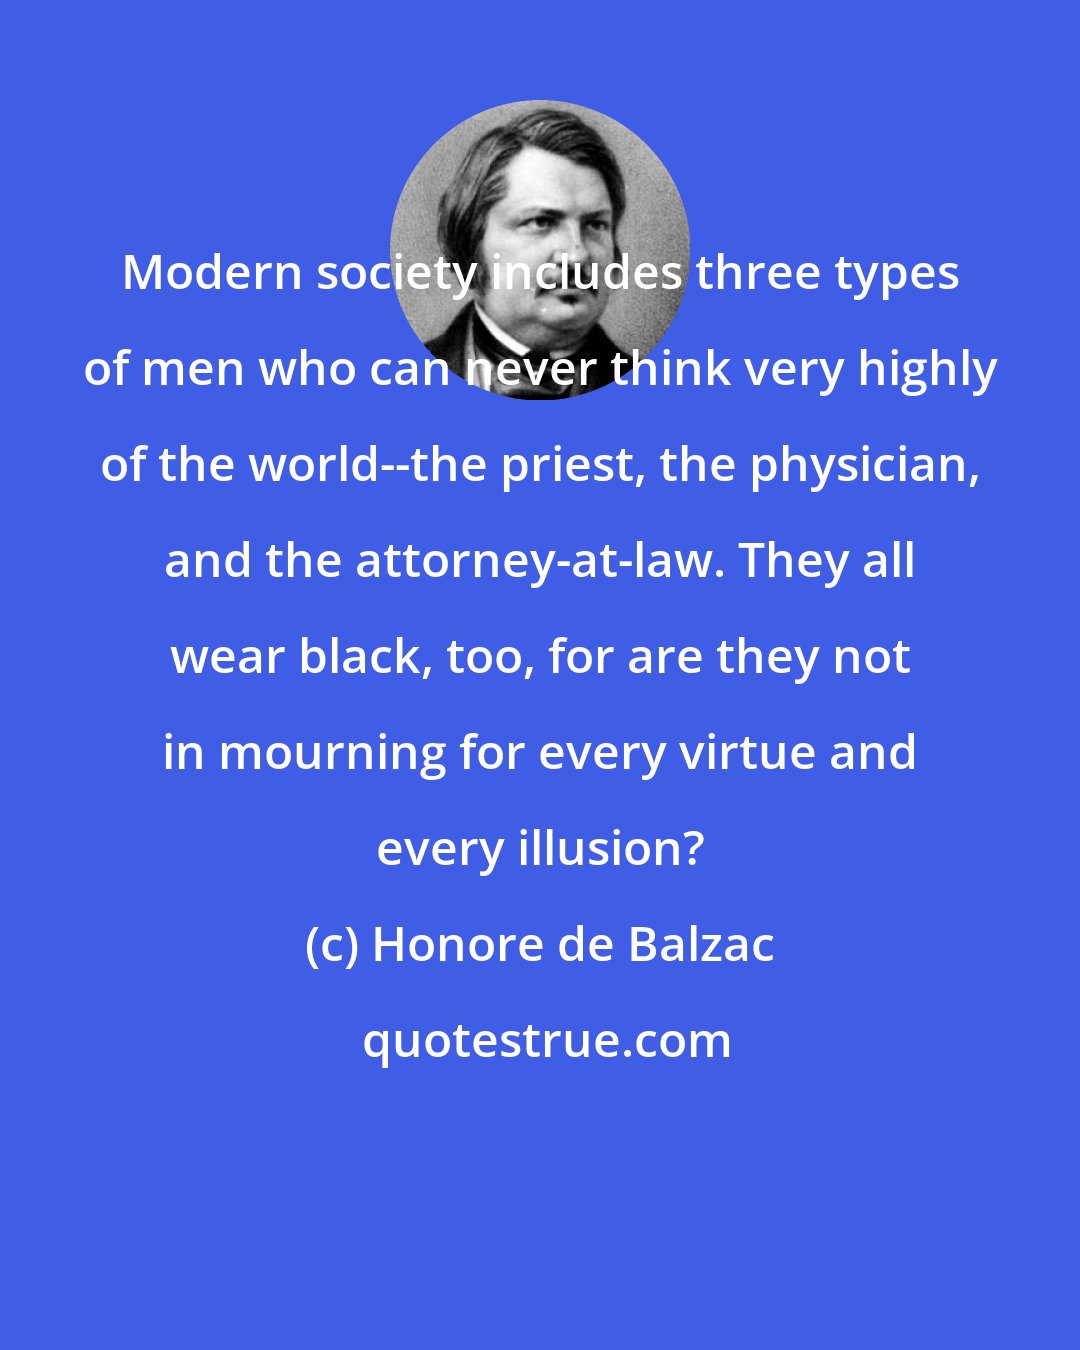 Honore de Balzac: Modern society includes three types of men who can never think very highly of the world--the priest, the physician, and the attorney-at-law. They all wear black, too, for are they not in mourning for every virtue and every illusion?